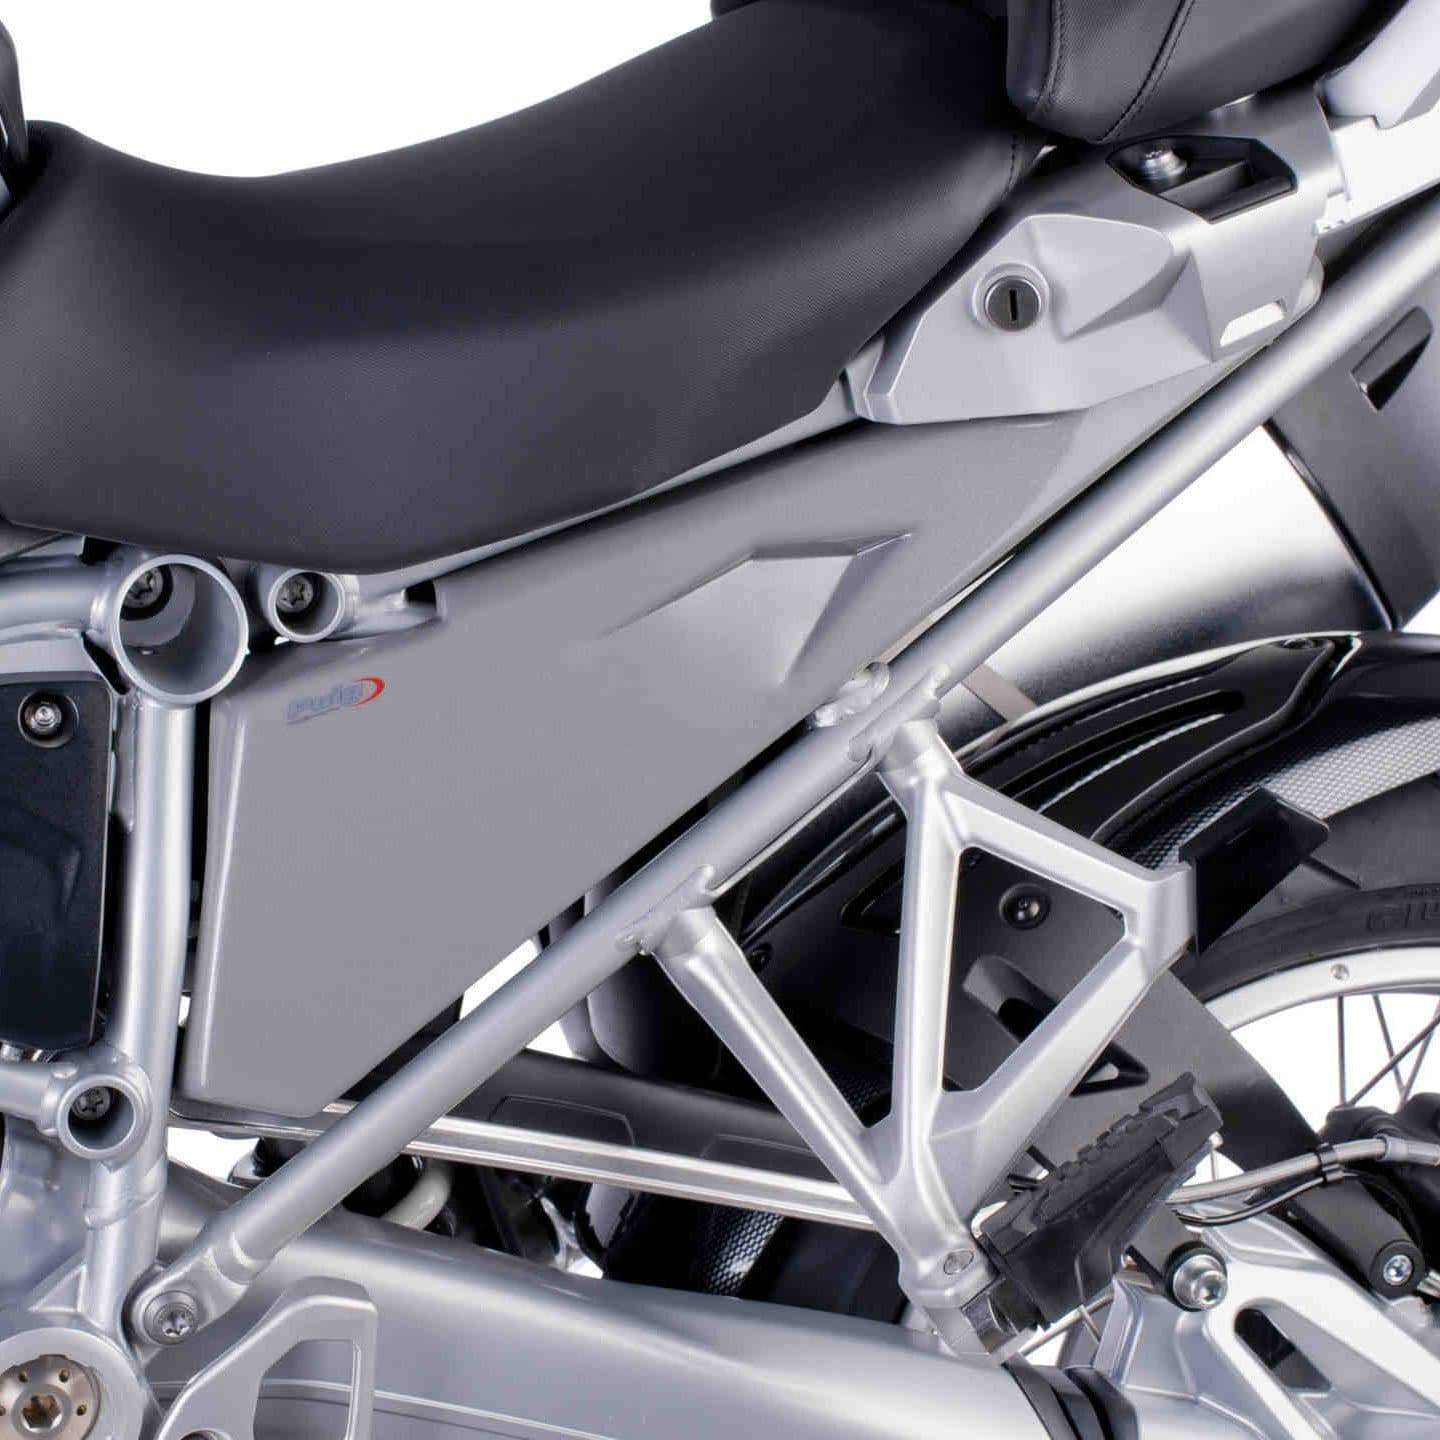 Puig Infill Panels | Grey | BMW R1200 GS Adventure 2014>2018-M7518U-Infill Panels-Pyramid Motorcycle Accessories